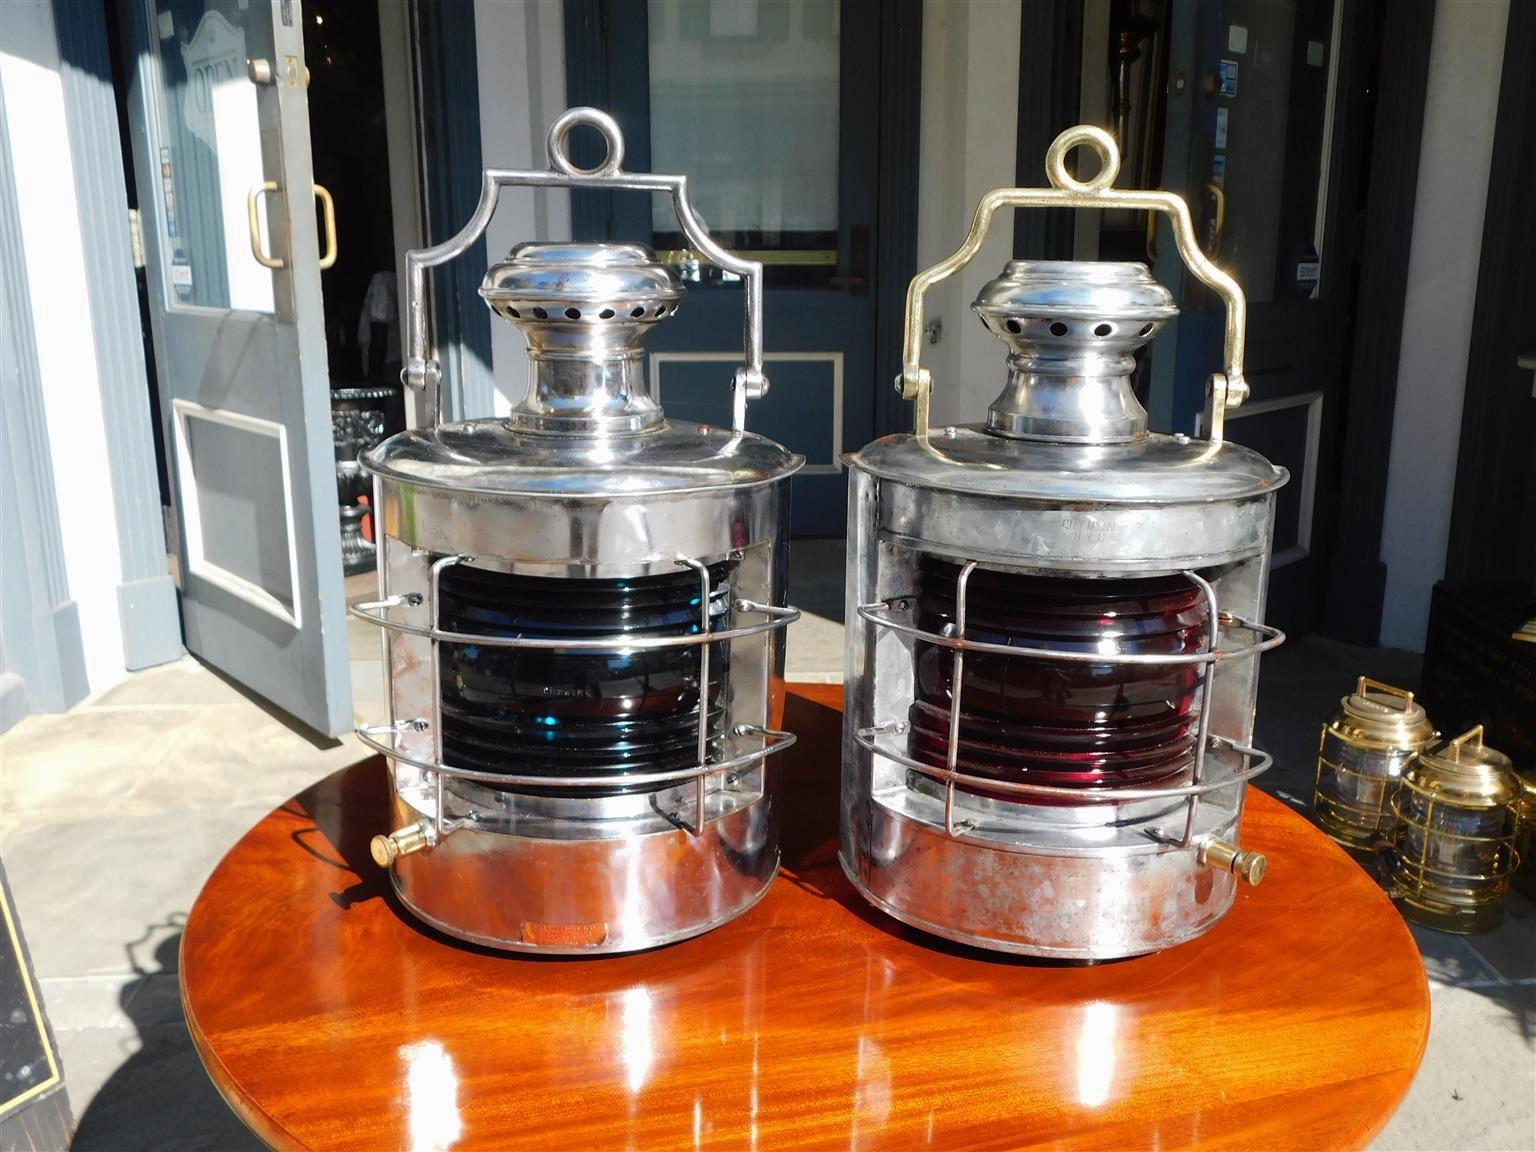 Pair of American Nautical port & starboard polished steel and brass ship lanterns with the original red and blue Fresnel lenses, flanking vented dome finials, exterior protective cages, hinged doors with rear mounts, and mounted hinged carrying